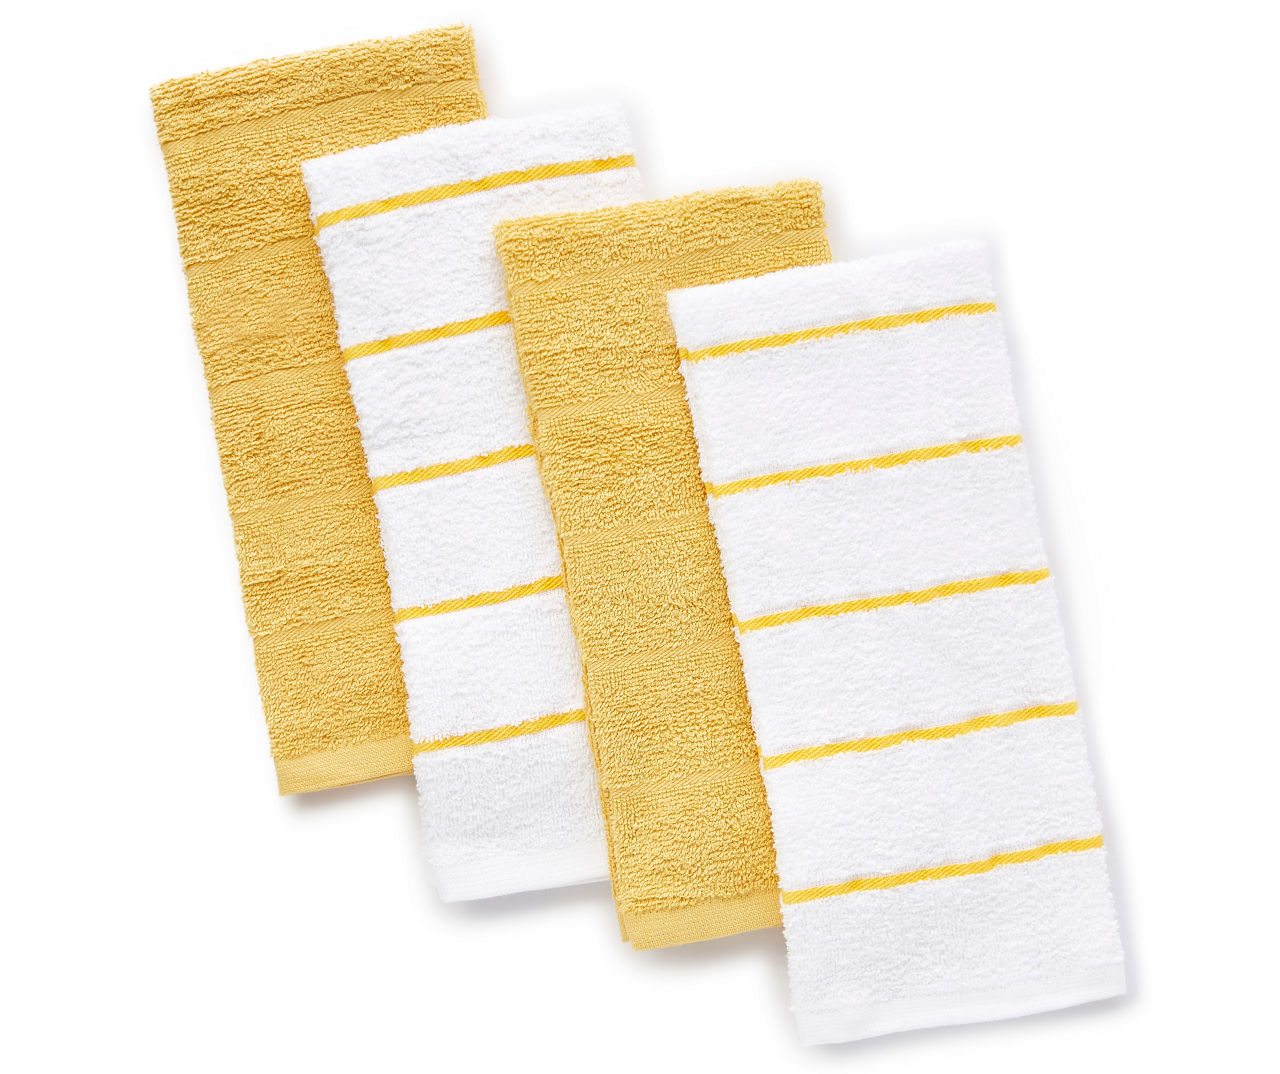 Master Cuisine Yellow & White Cotton Kitchen Towels, 4-Pack